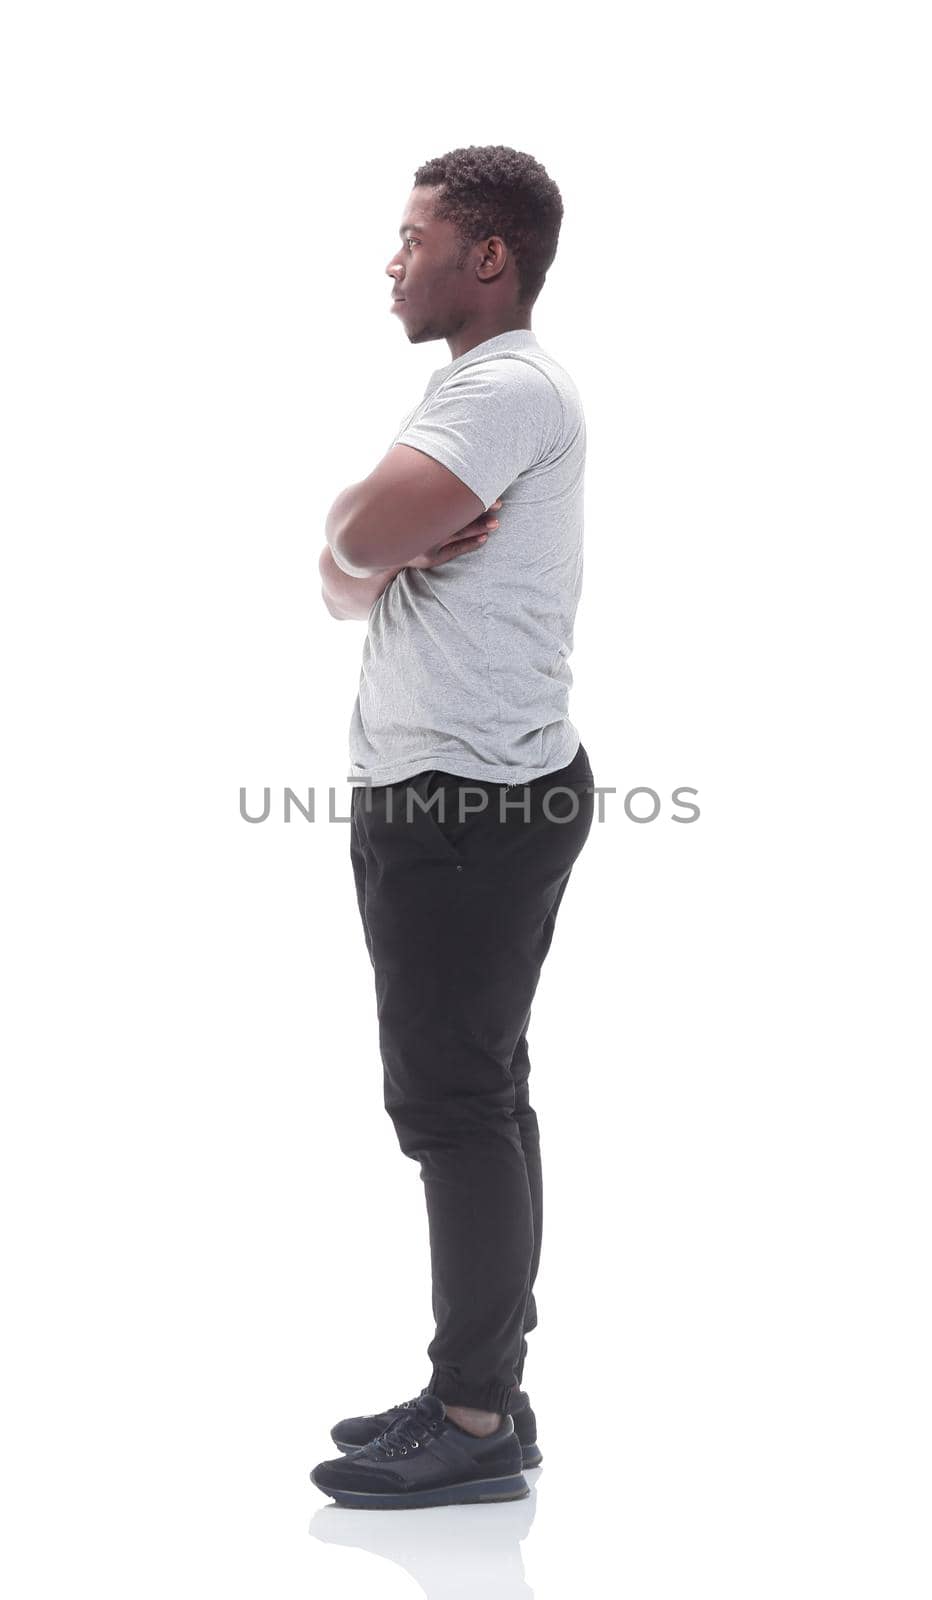 side view. smiling guy in a white t-shirt. isolated on white background